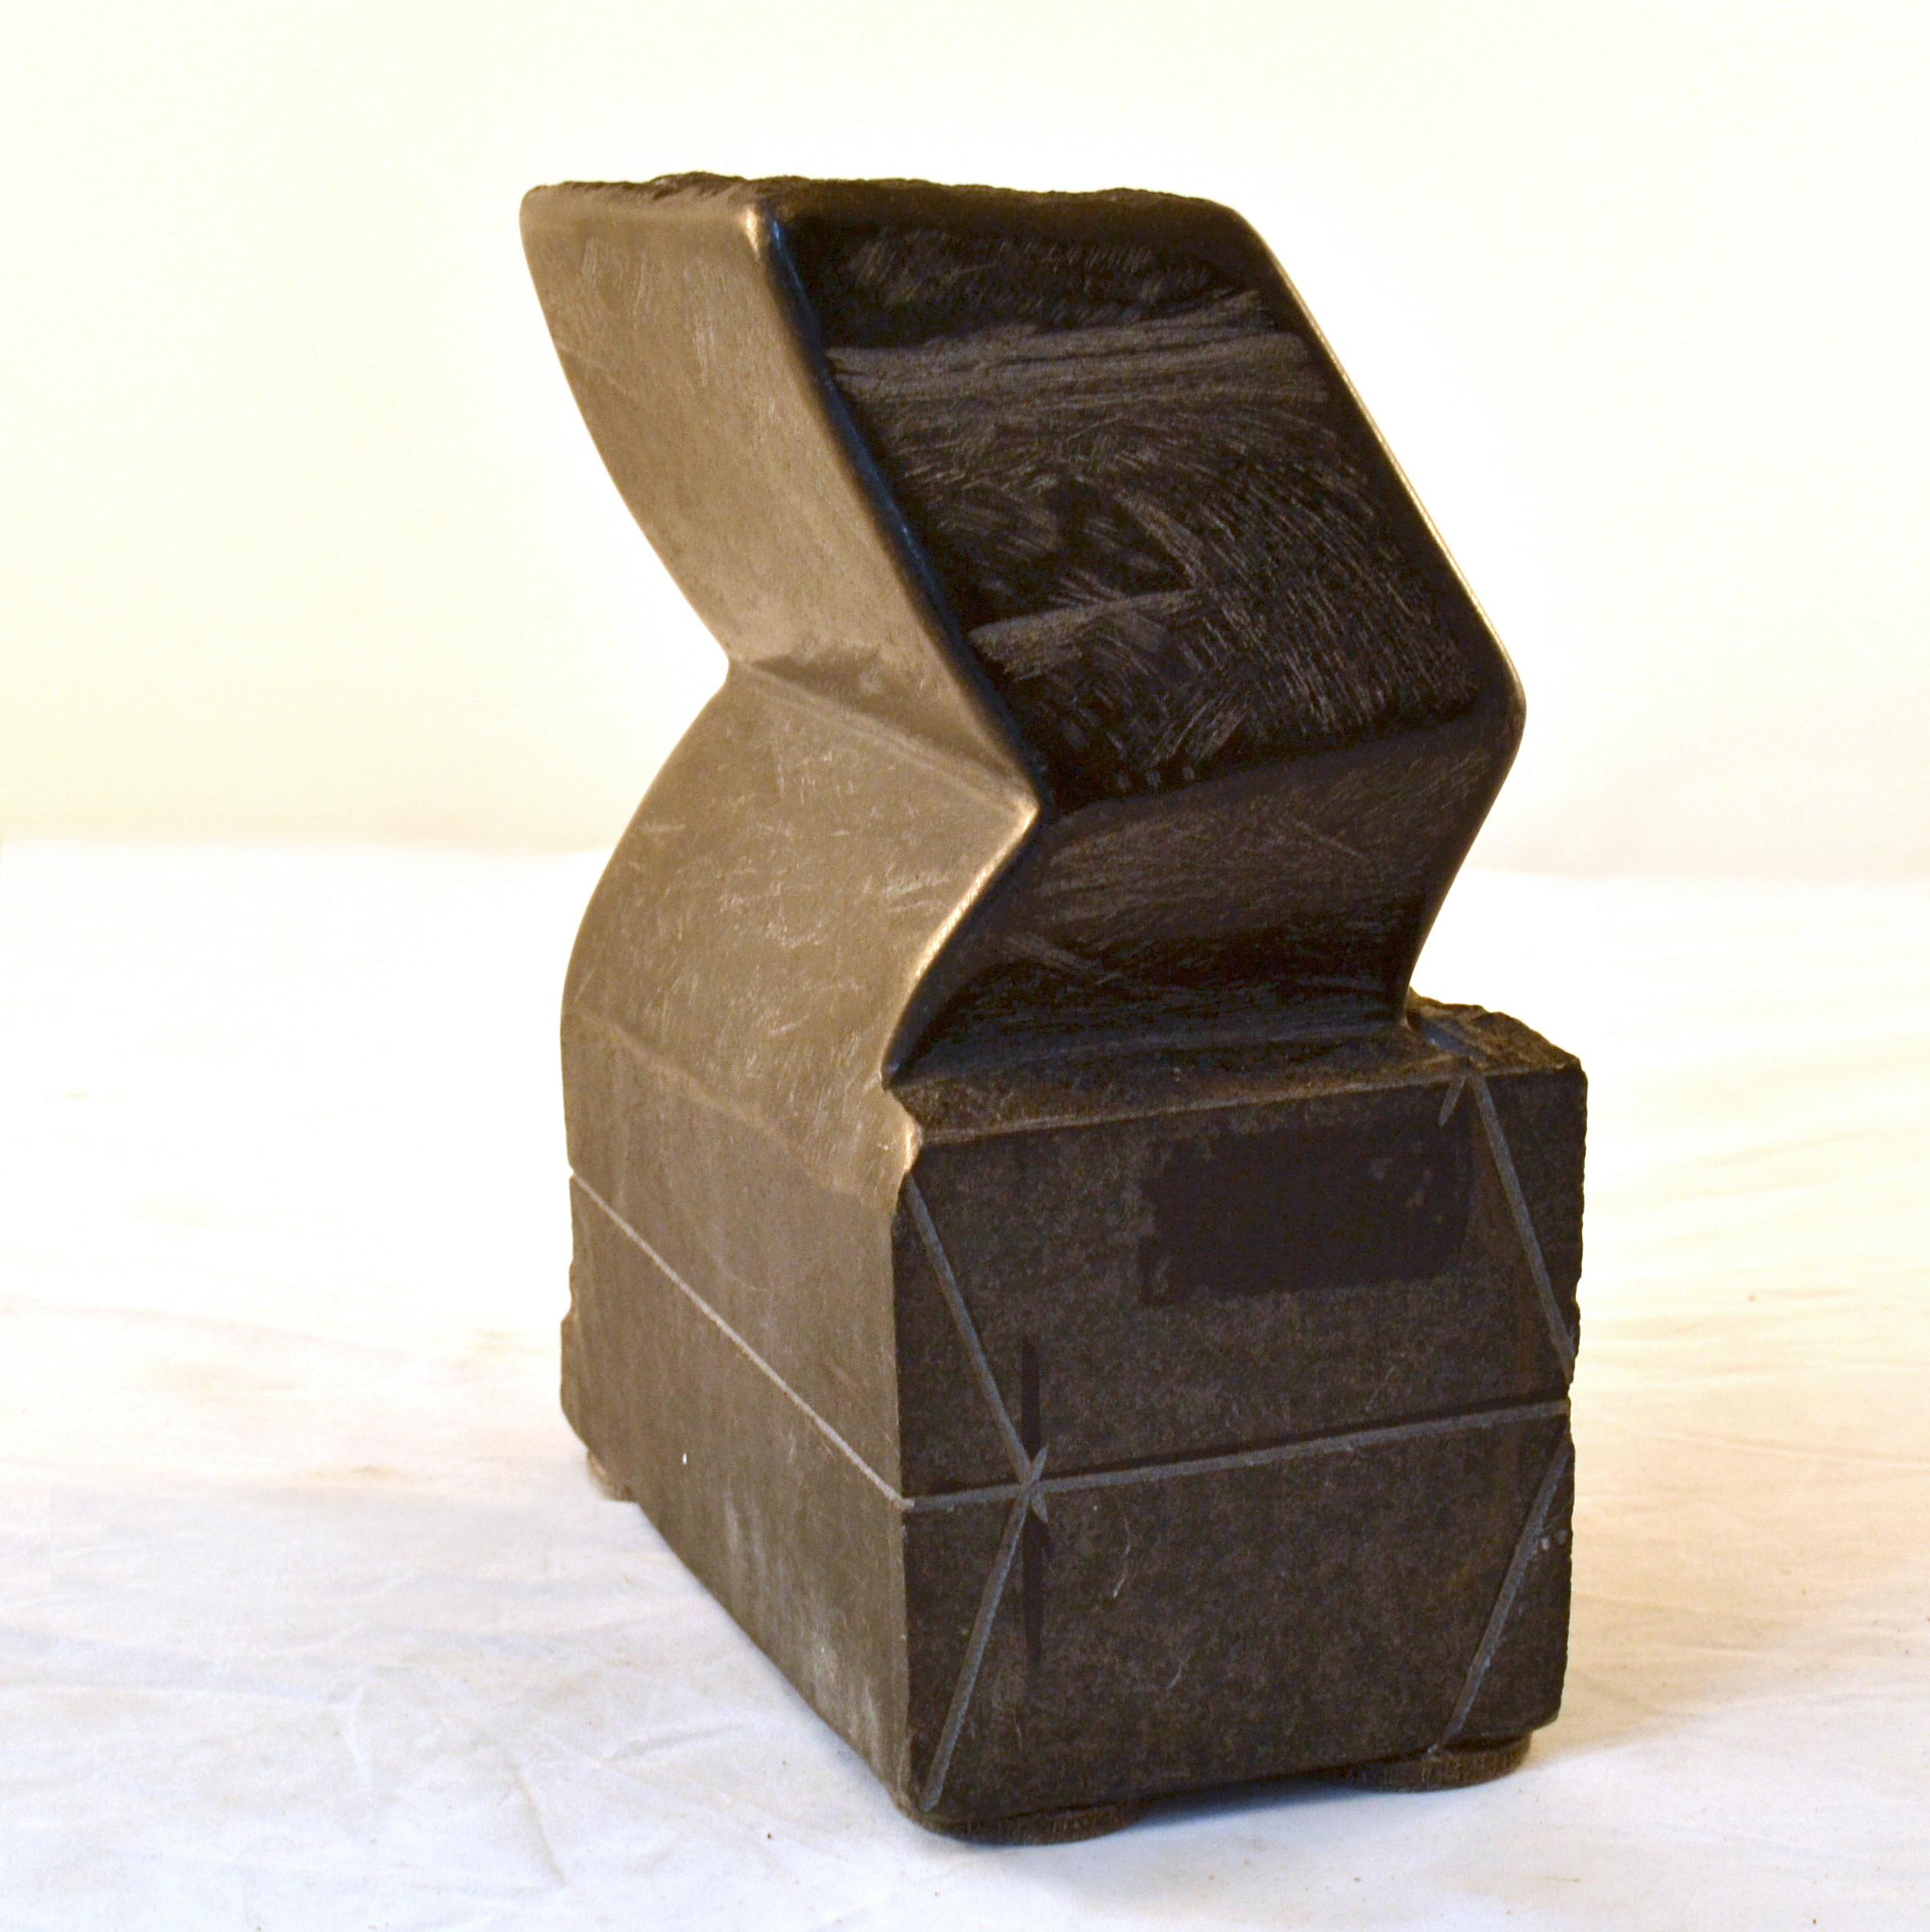 Group of Black Granite Geometric Abstract Dutch Sculptures For Sale 7